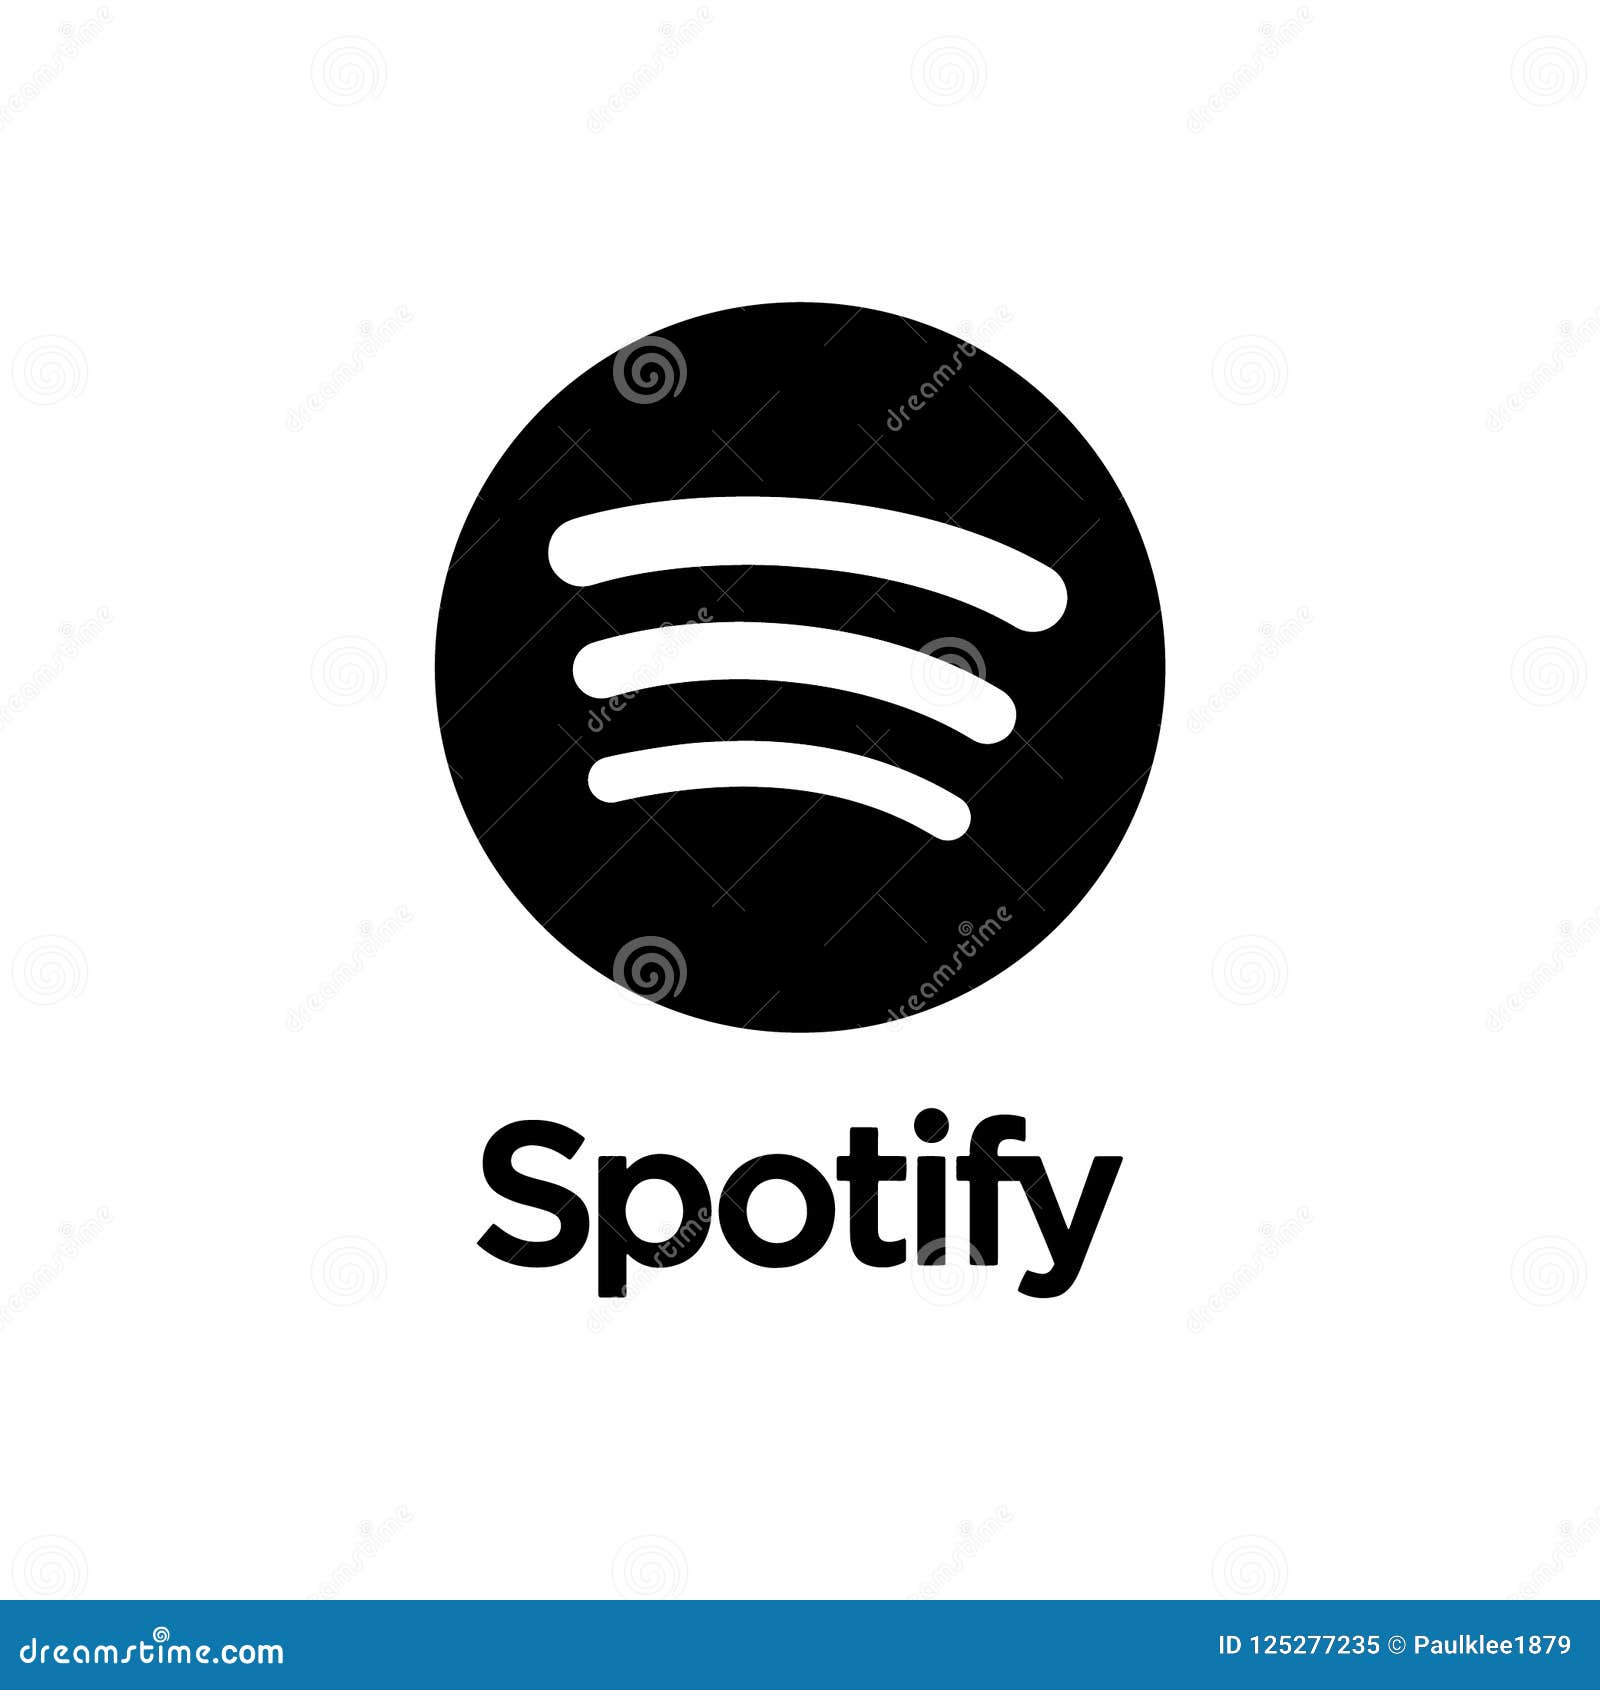 Spotify Icon Printed on Paper. Editorial Image - Illustration of